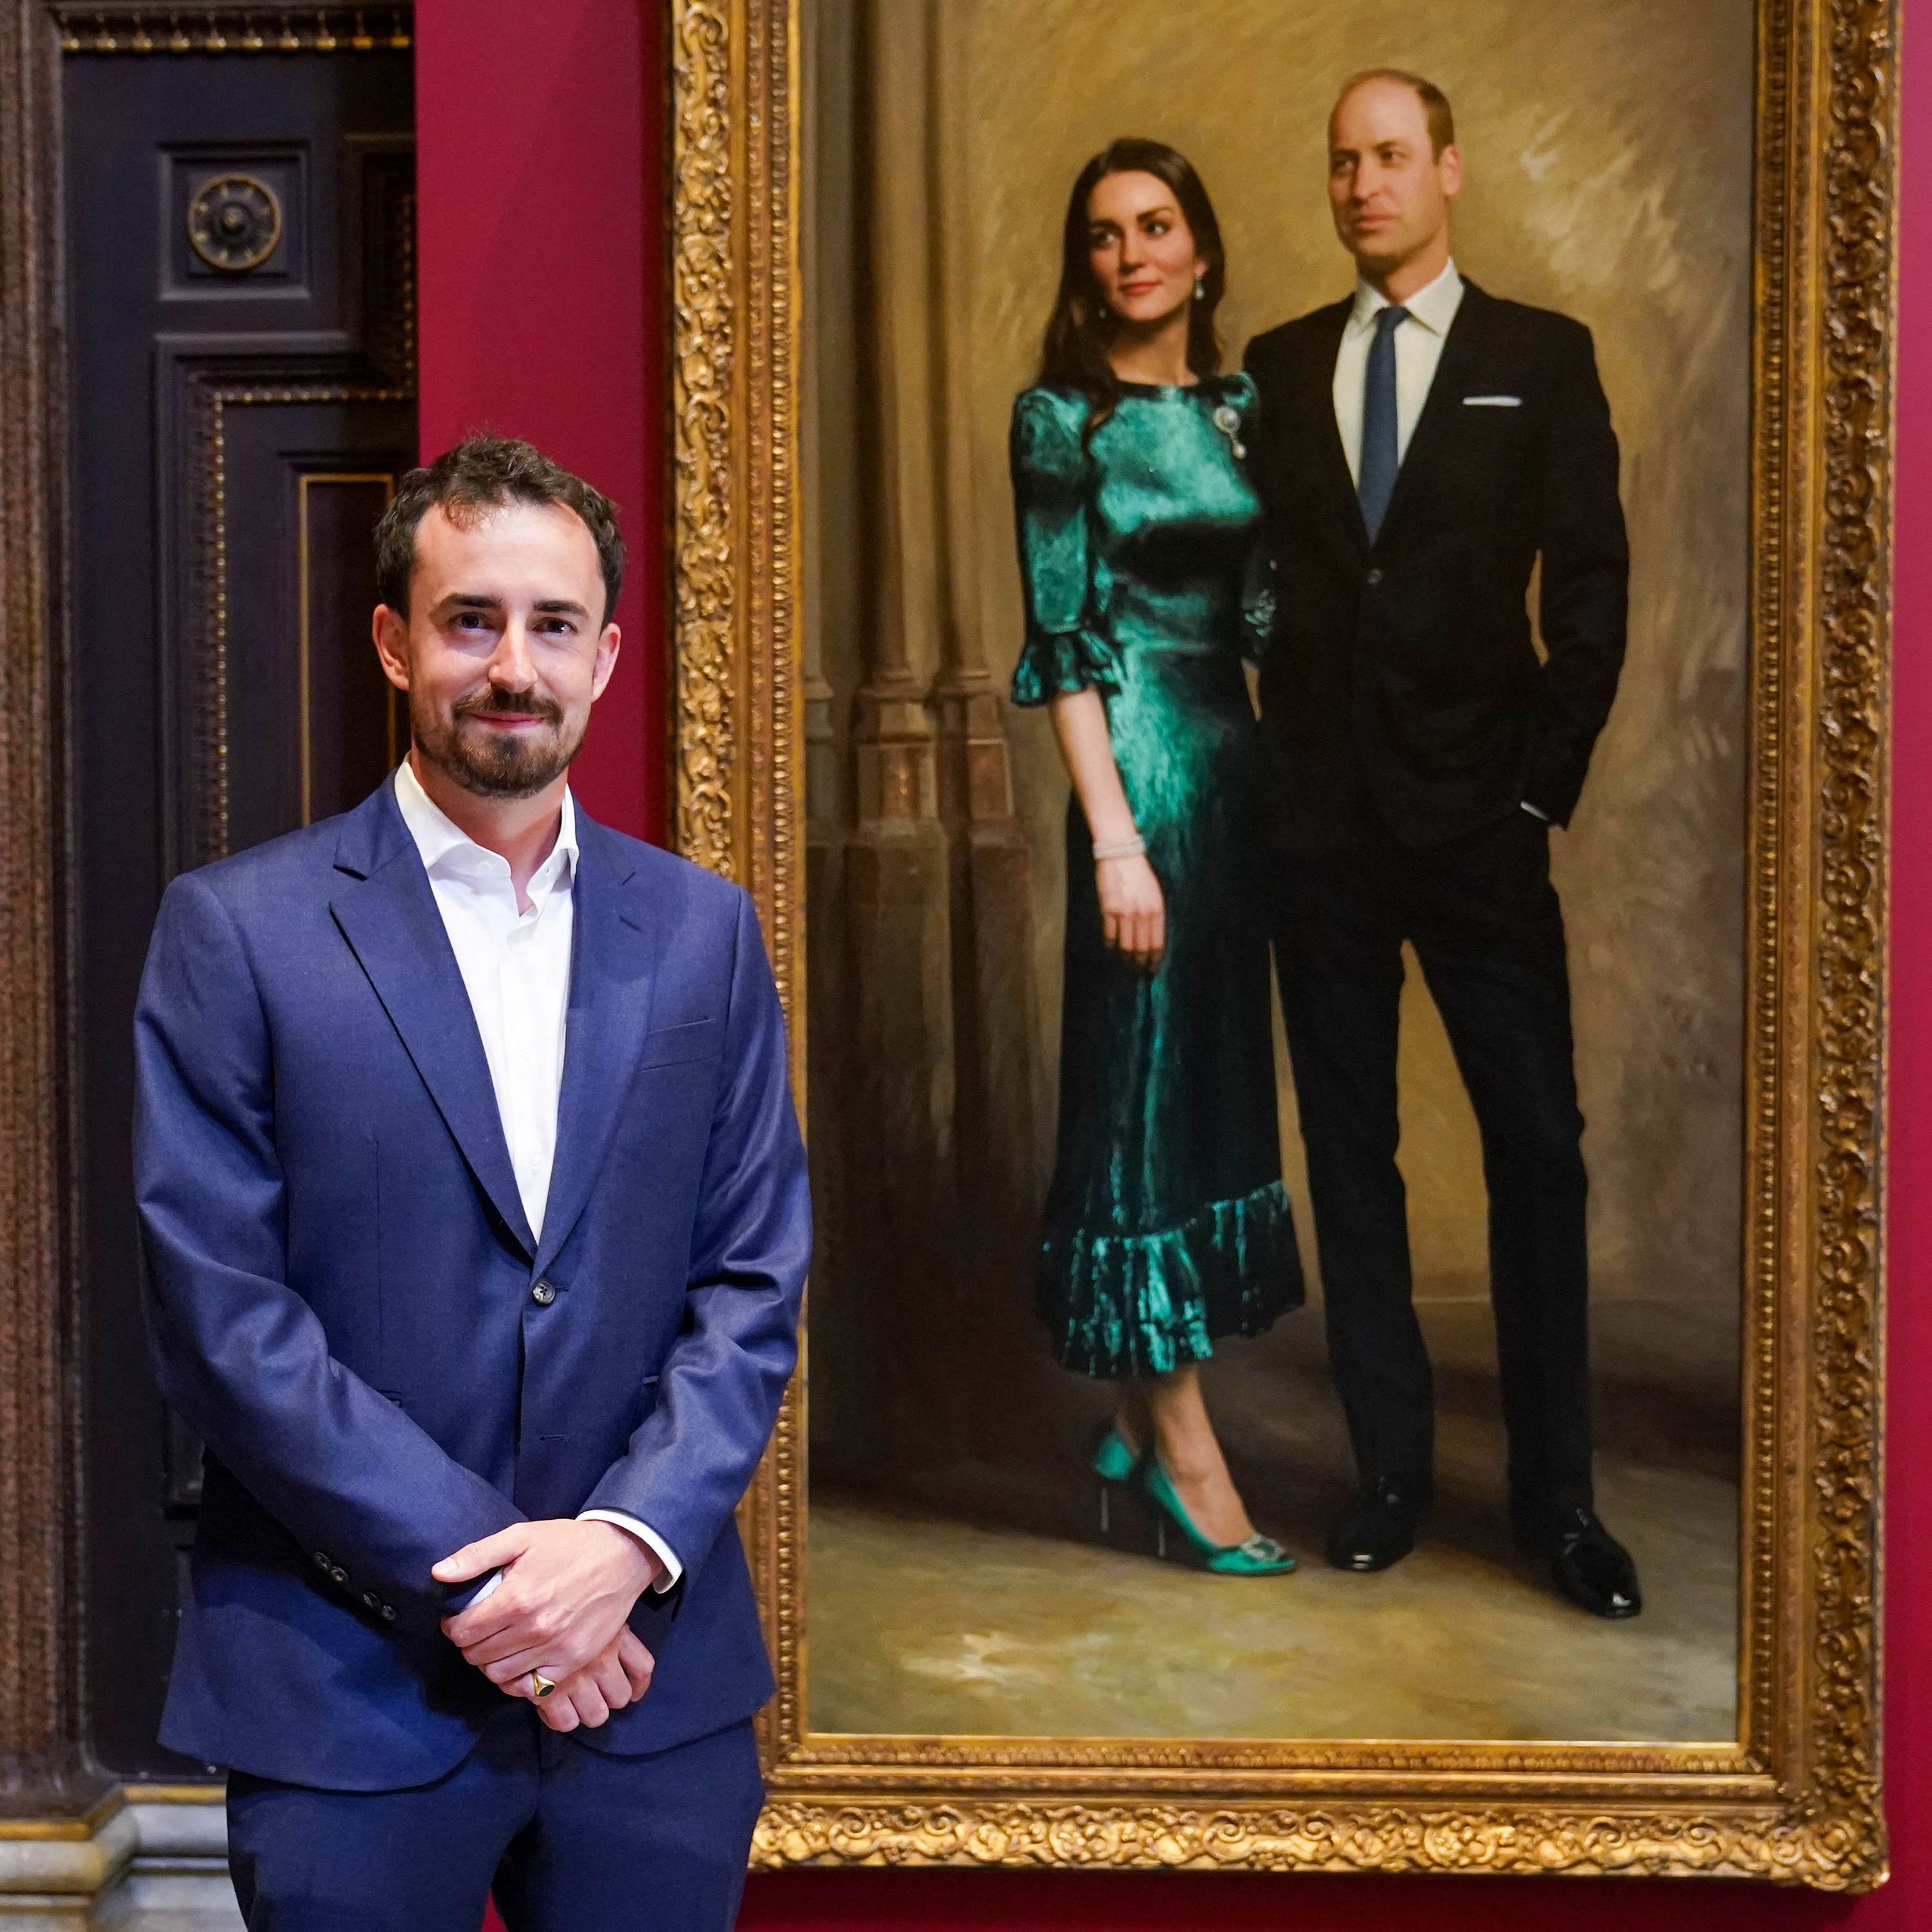 Prince William and Kate's first official joing portrait has been